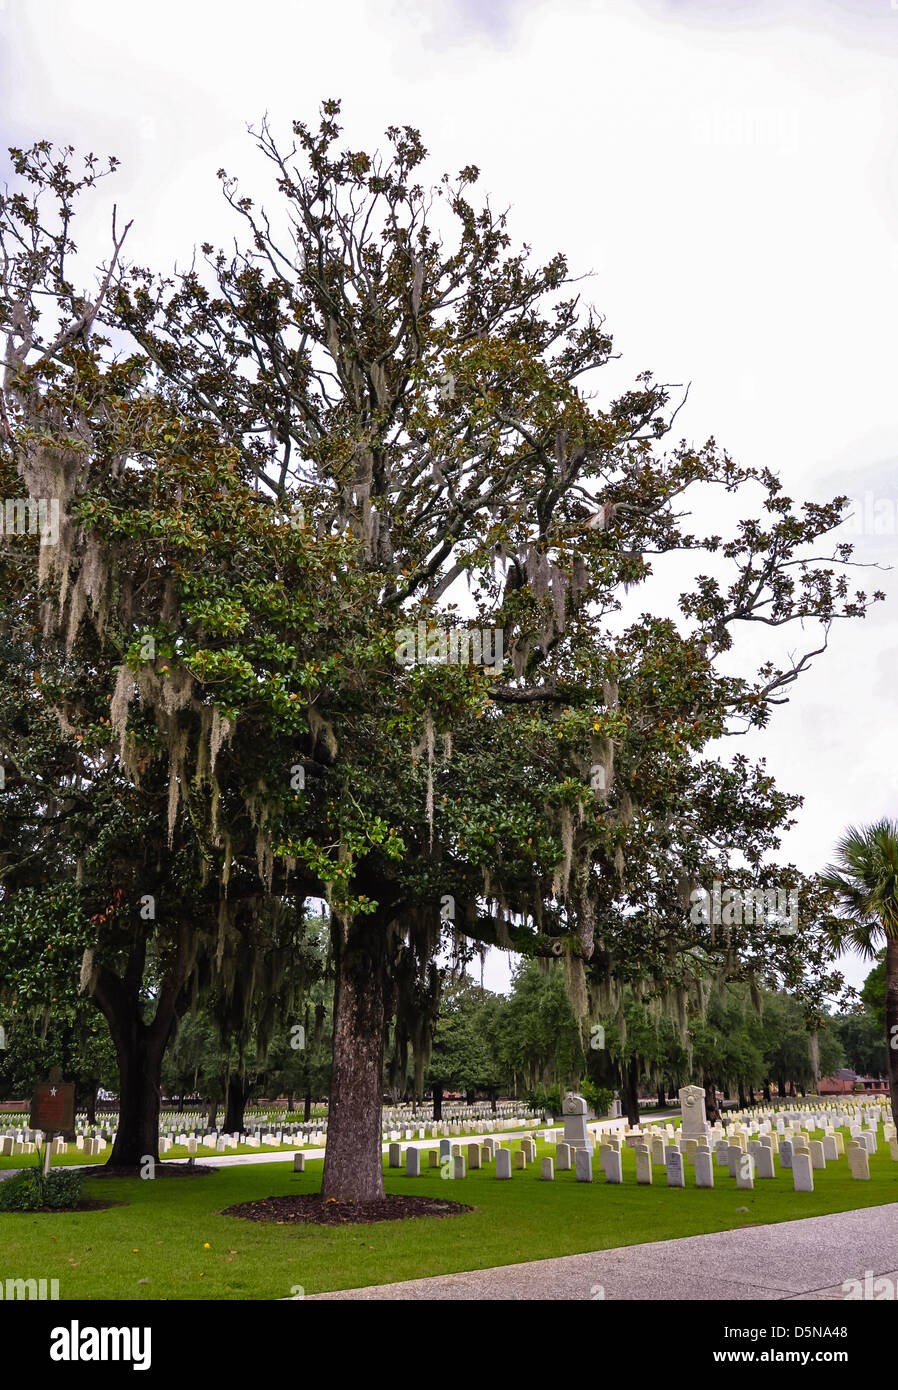 chokeweed laden tree on a military graveyard Stock Photo